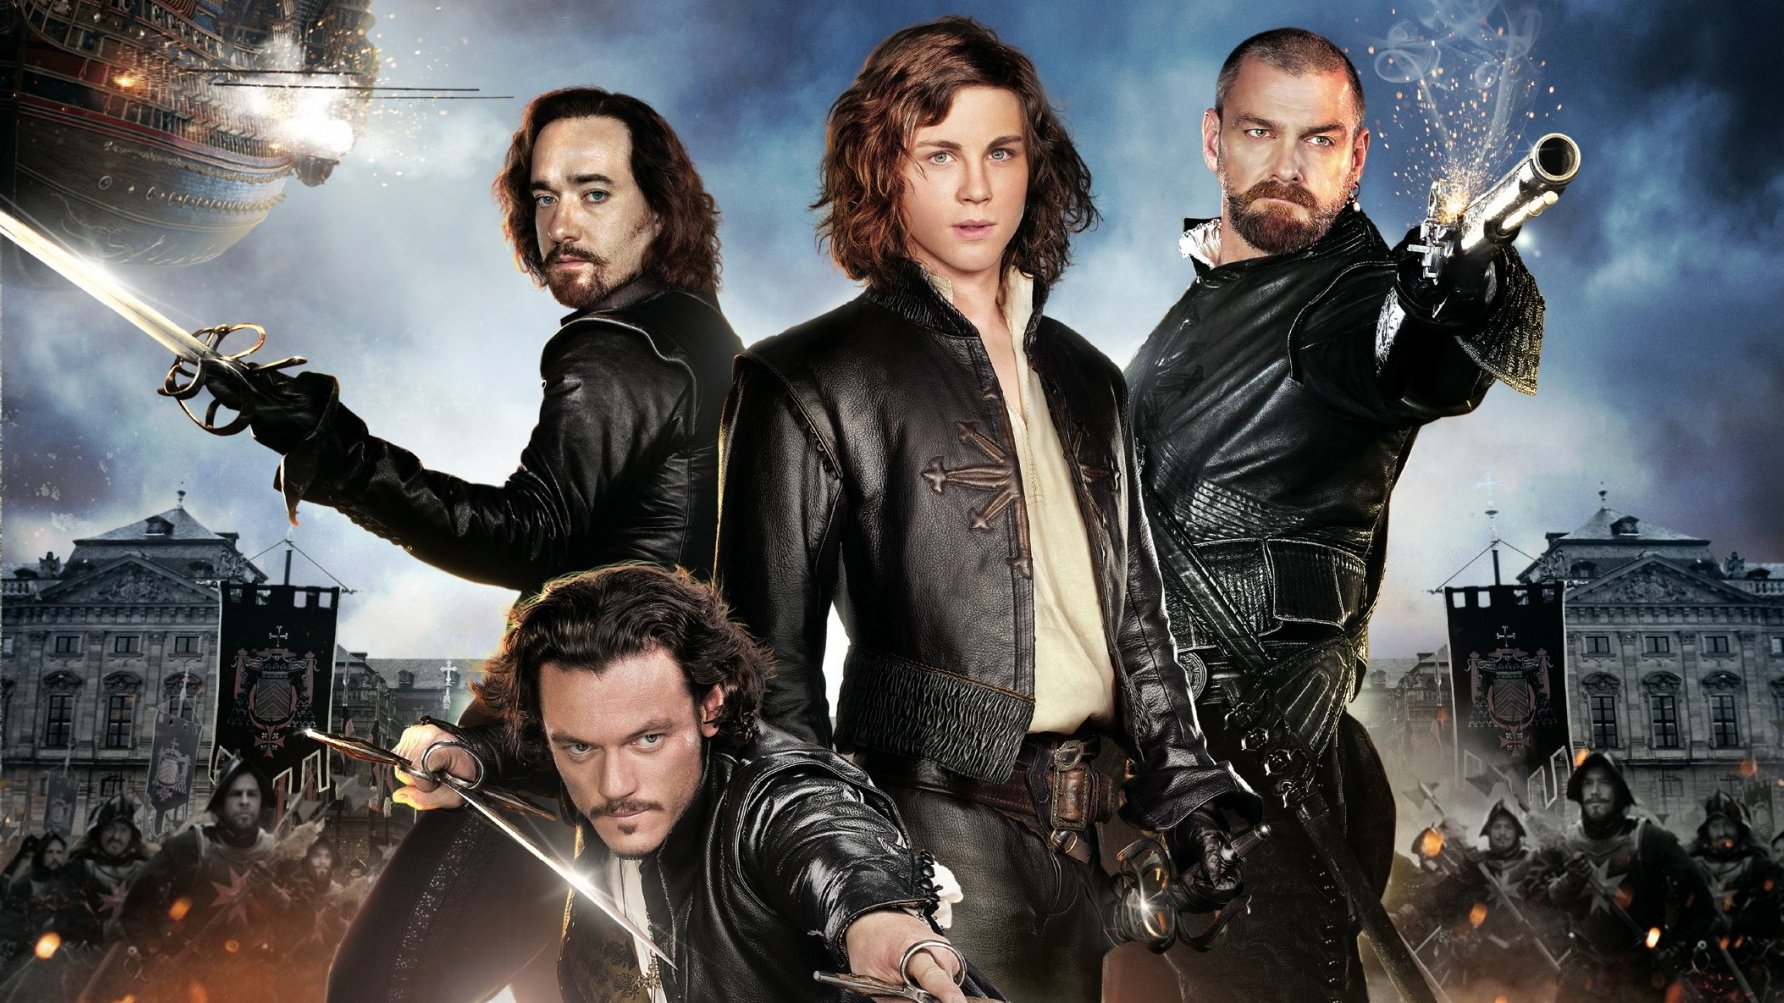 The Three Musketeers Movie The Three Musketeers Review And Rating